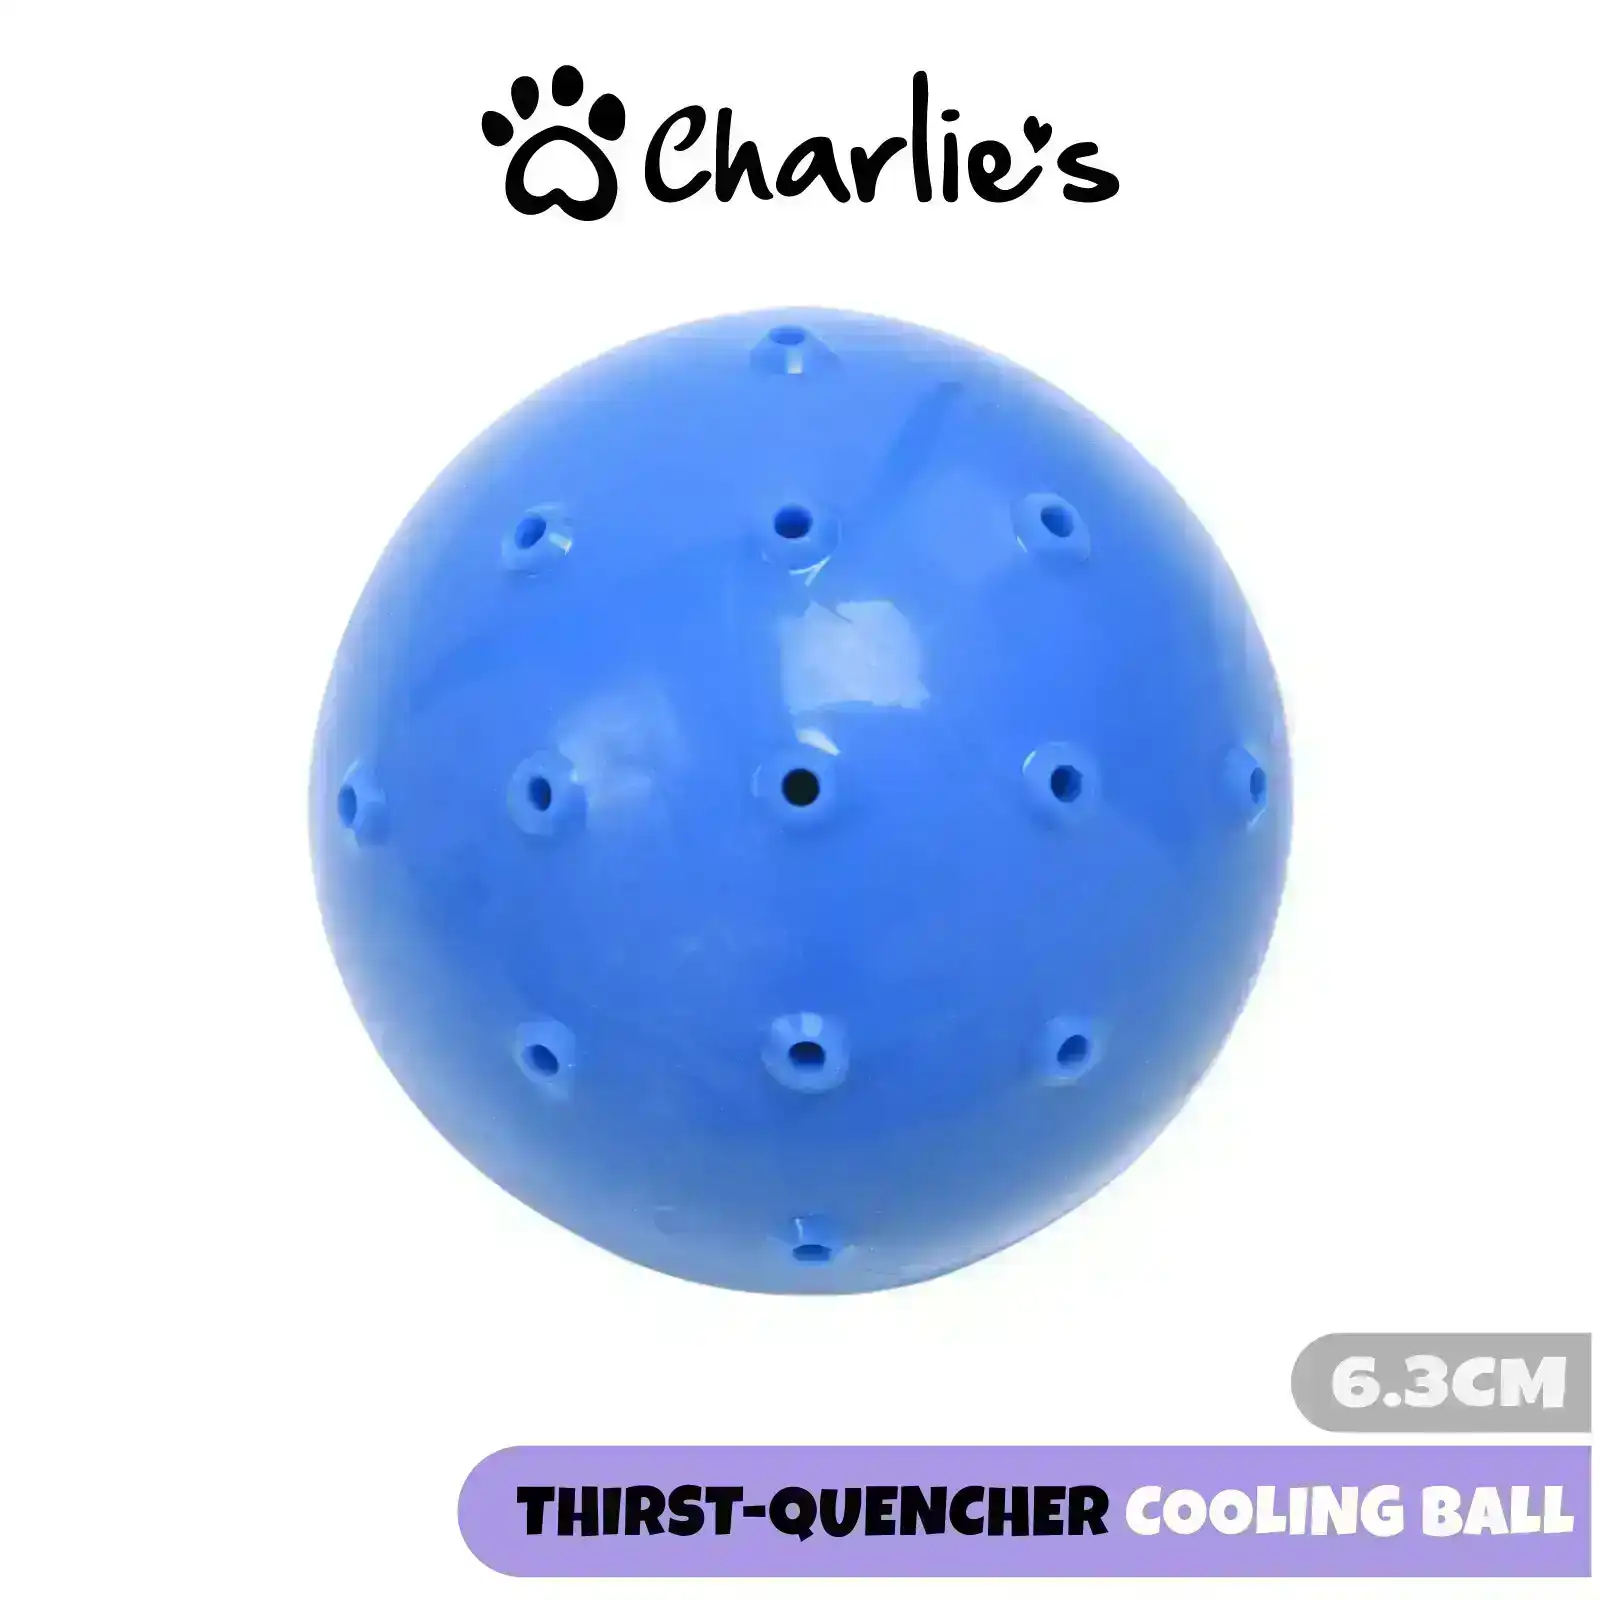 Charlie's Thirst-Quencher Cooling Ball Blue 6.3cm